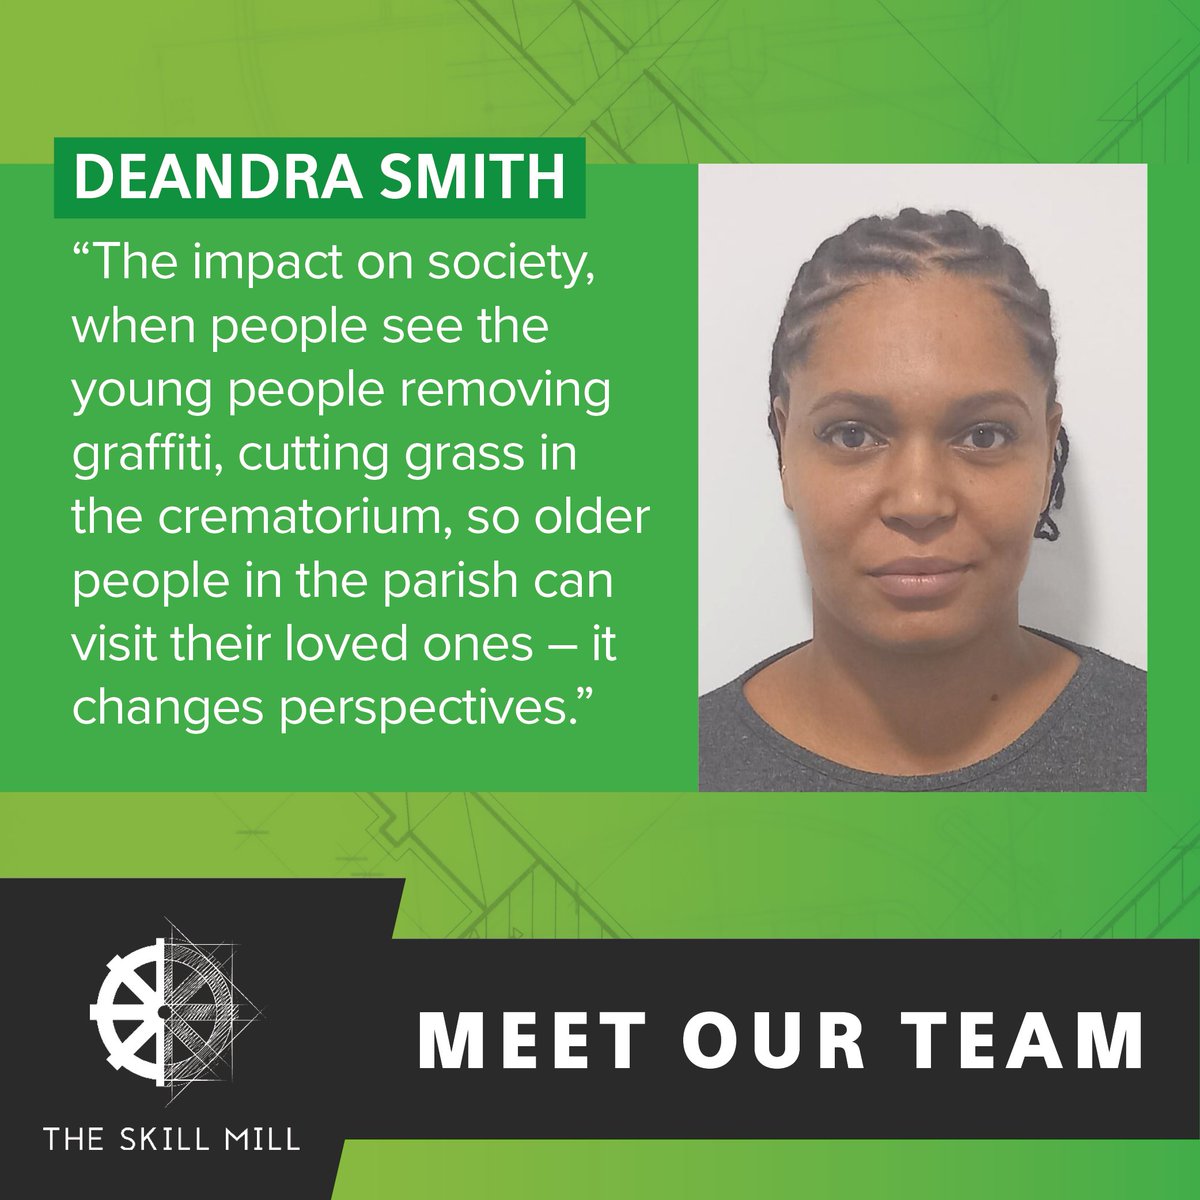 Introducing Deandra Smith, one of our #SkillMillSupers, and dedicated supervisor at Skill Mill Croydon. With skills in Programme Management and Construction Site Admin, she is teaching her team job and life skills for the future. Visit our website to learn more about our team.